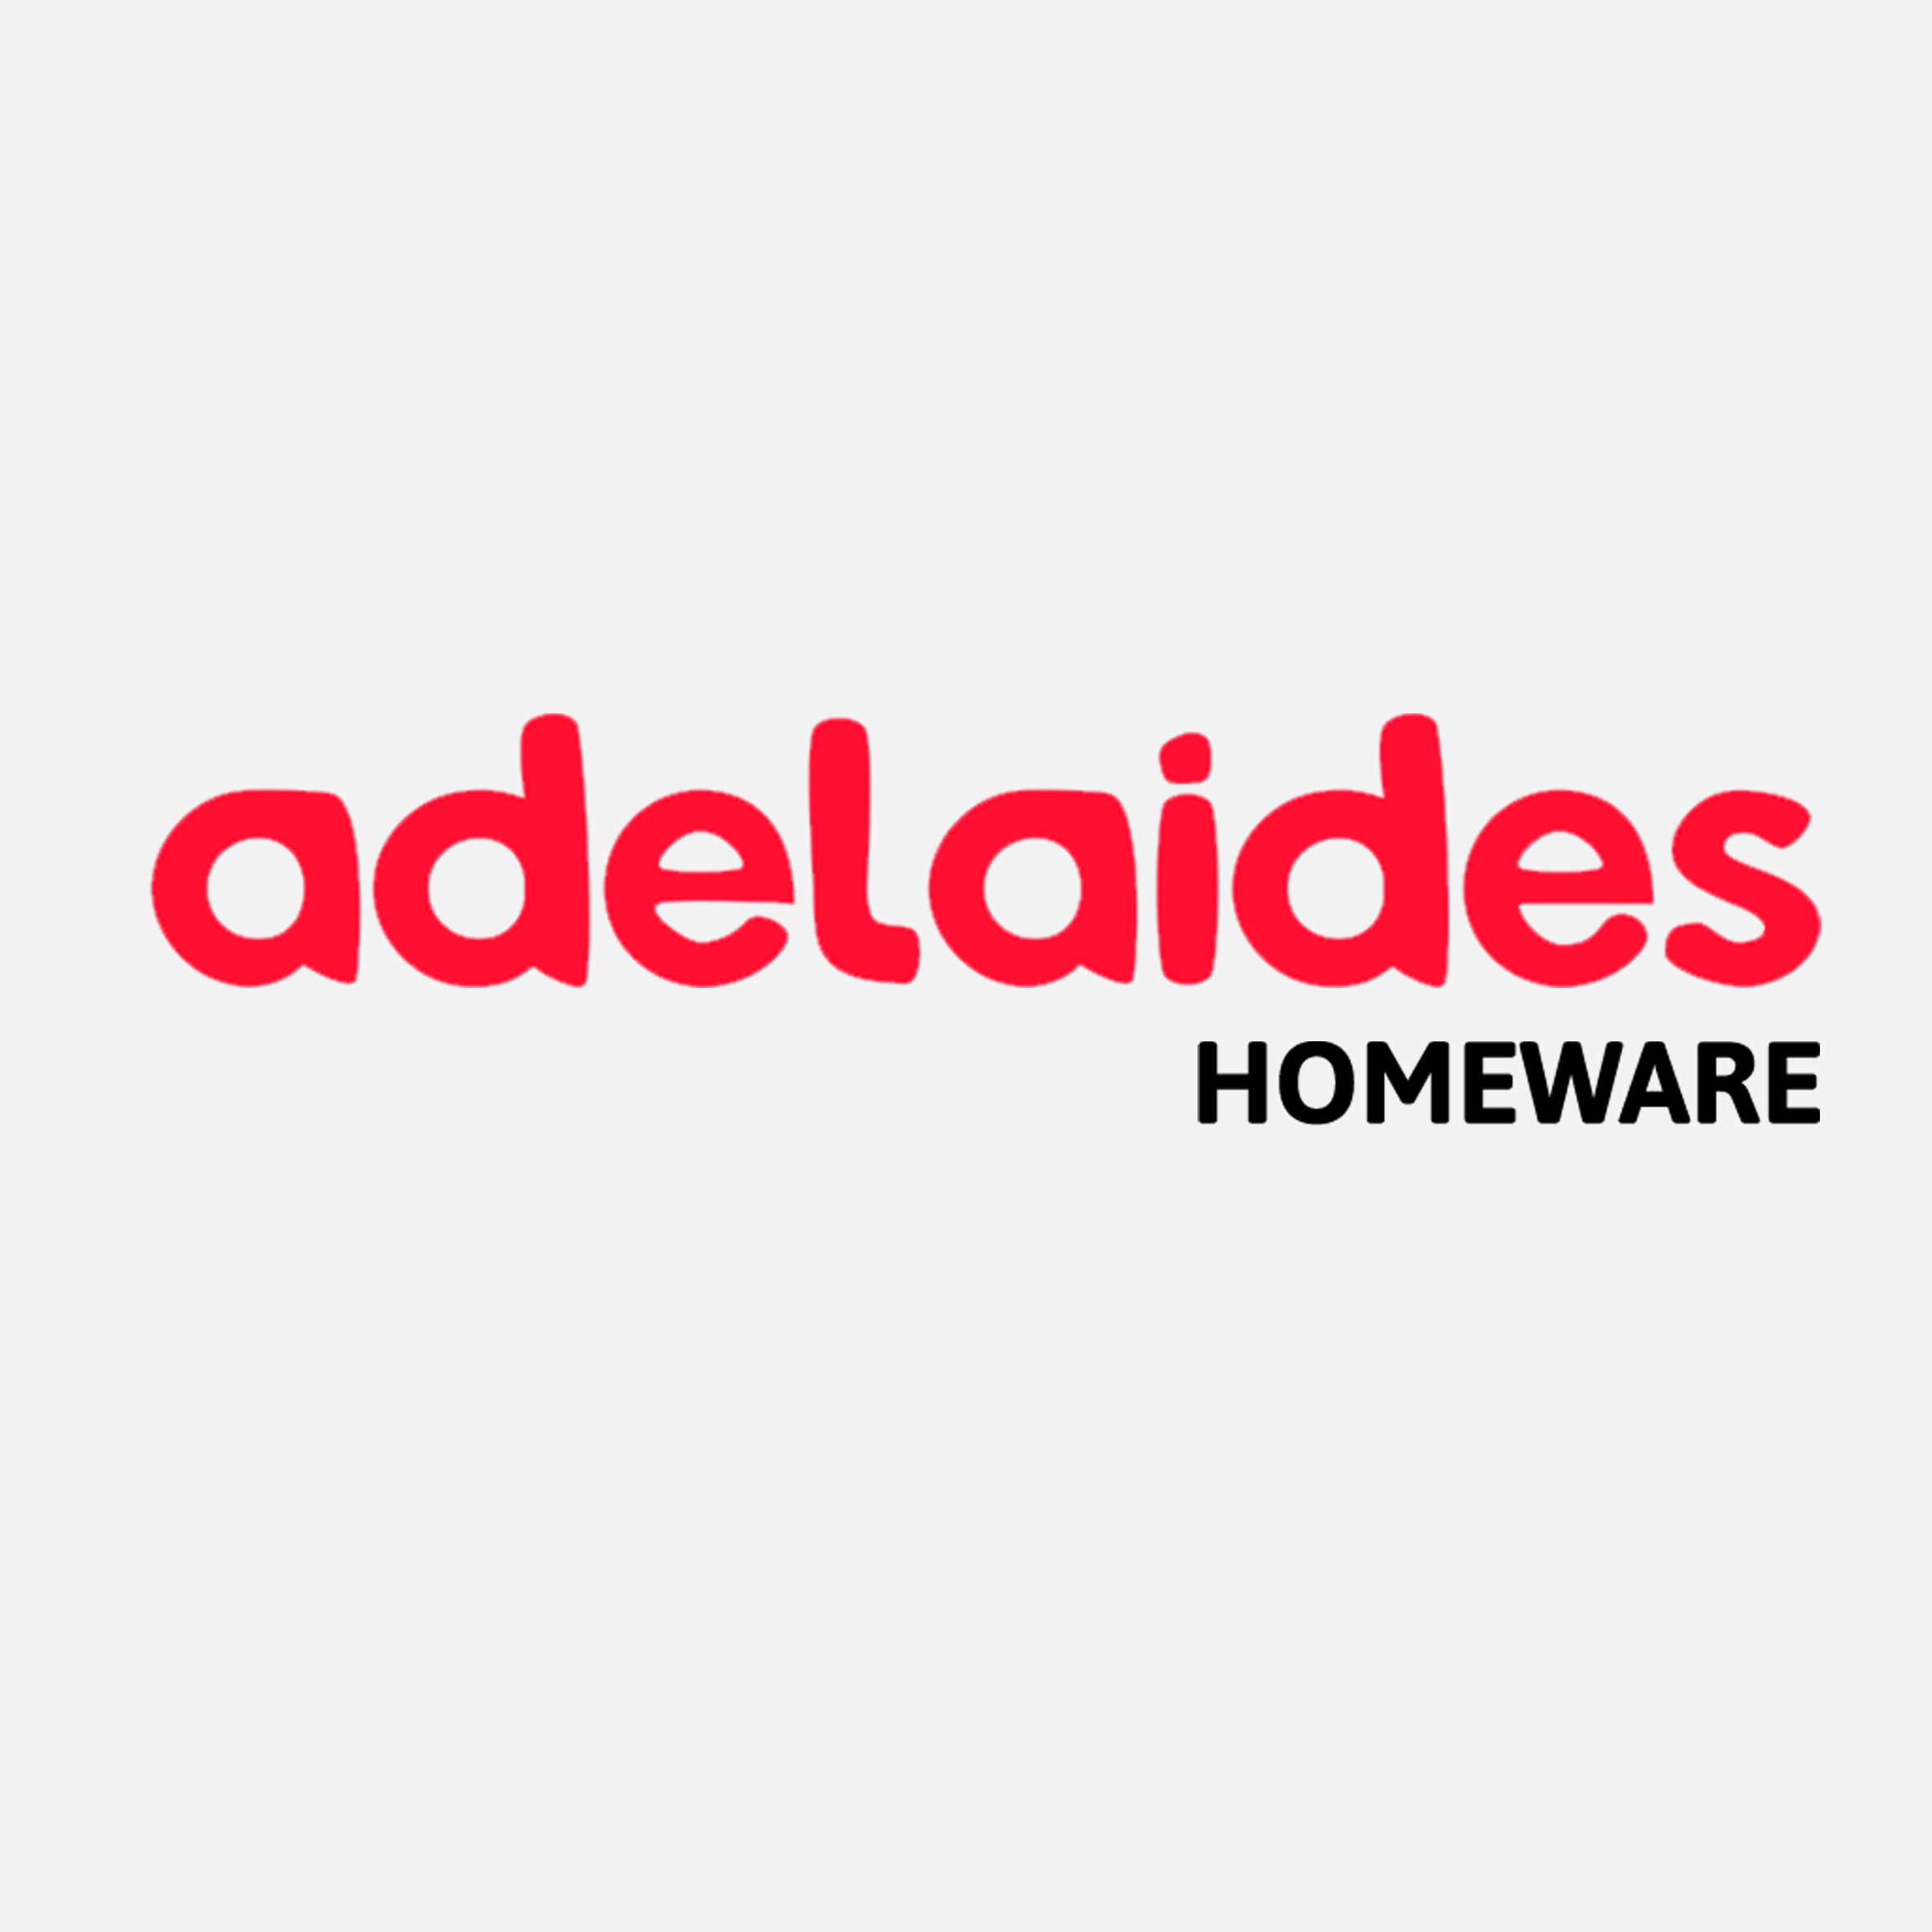 Adelaides Homeware Official Store